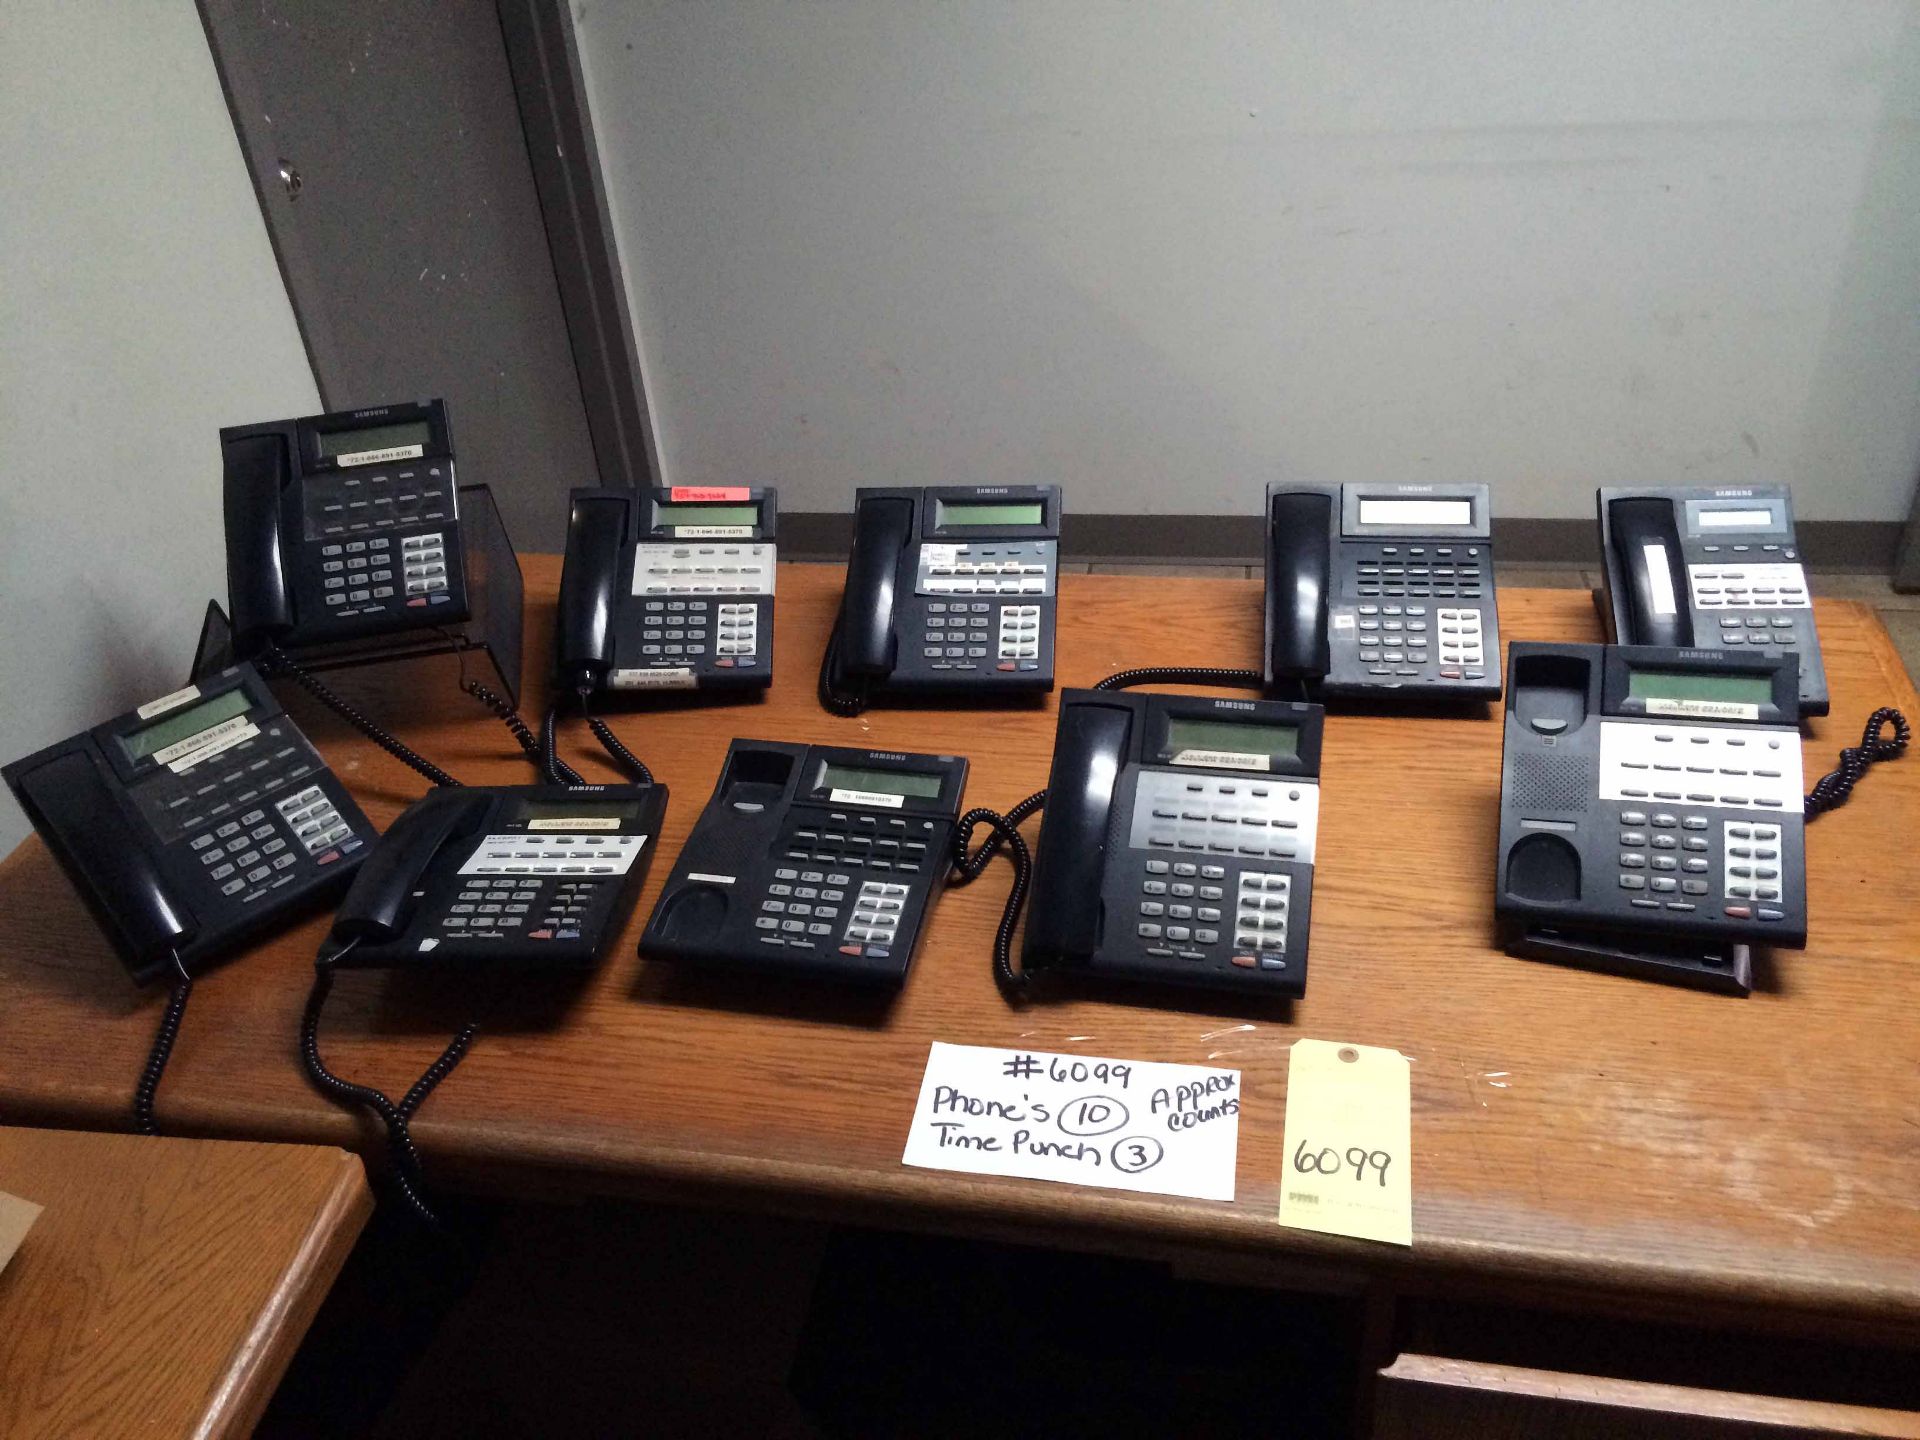 LOT CONSISTING OF TELEPHONES (10) & TIME PUNCHES (3) (approx. counts) LOCATED IN LONGVIEW, TX